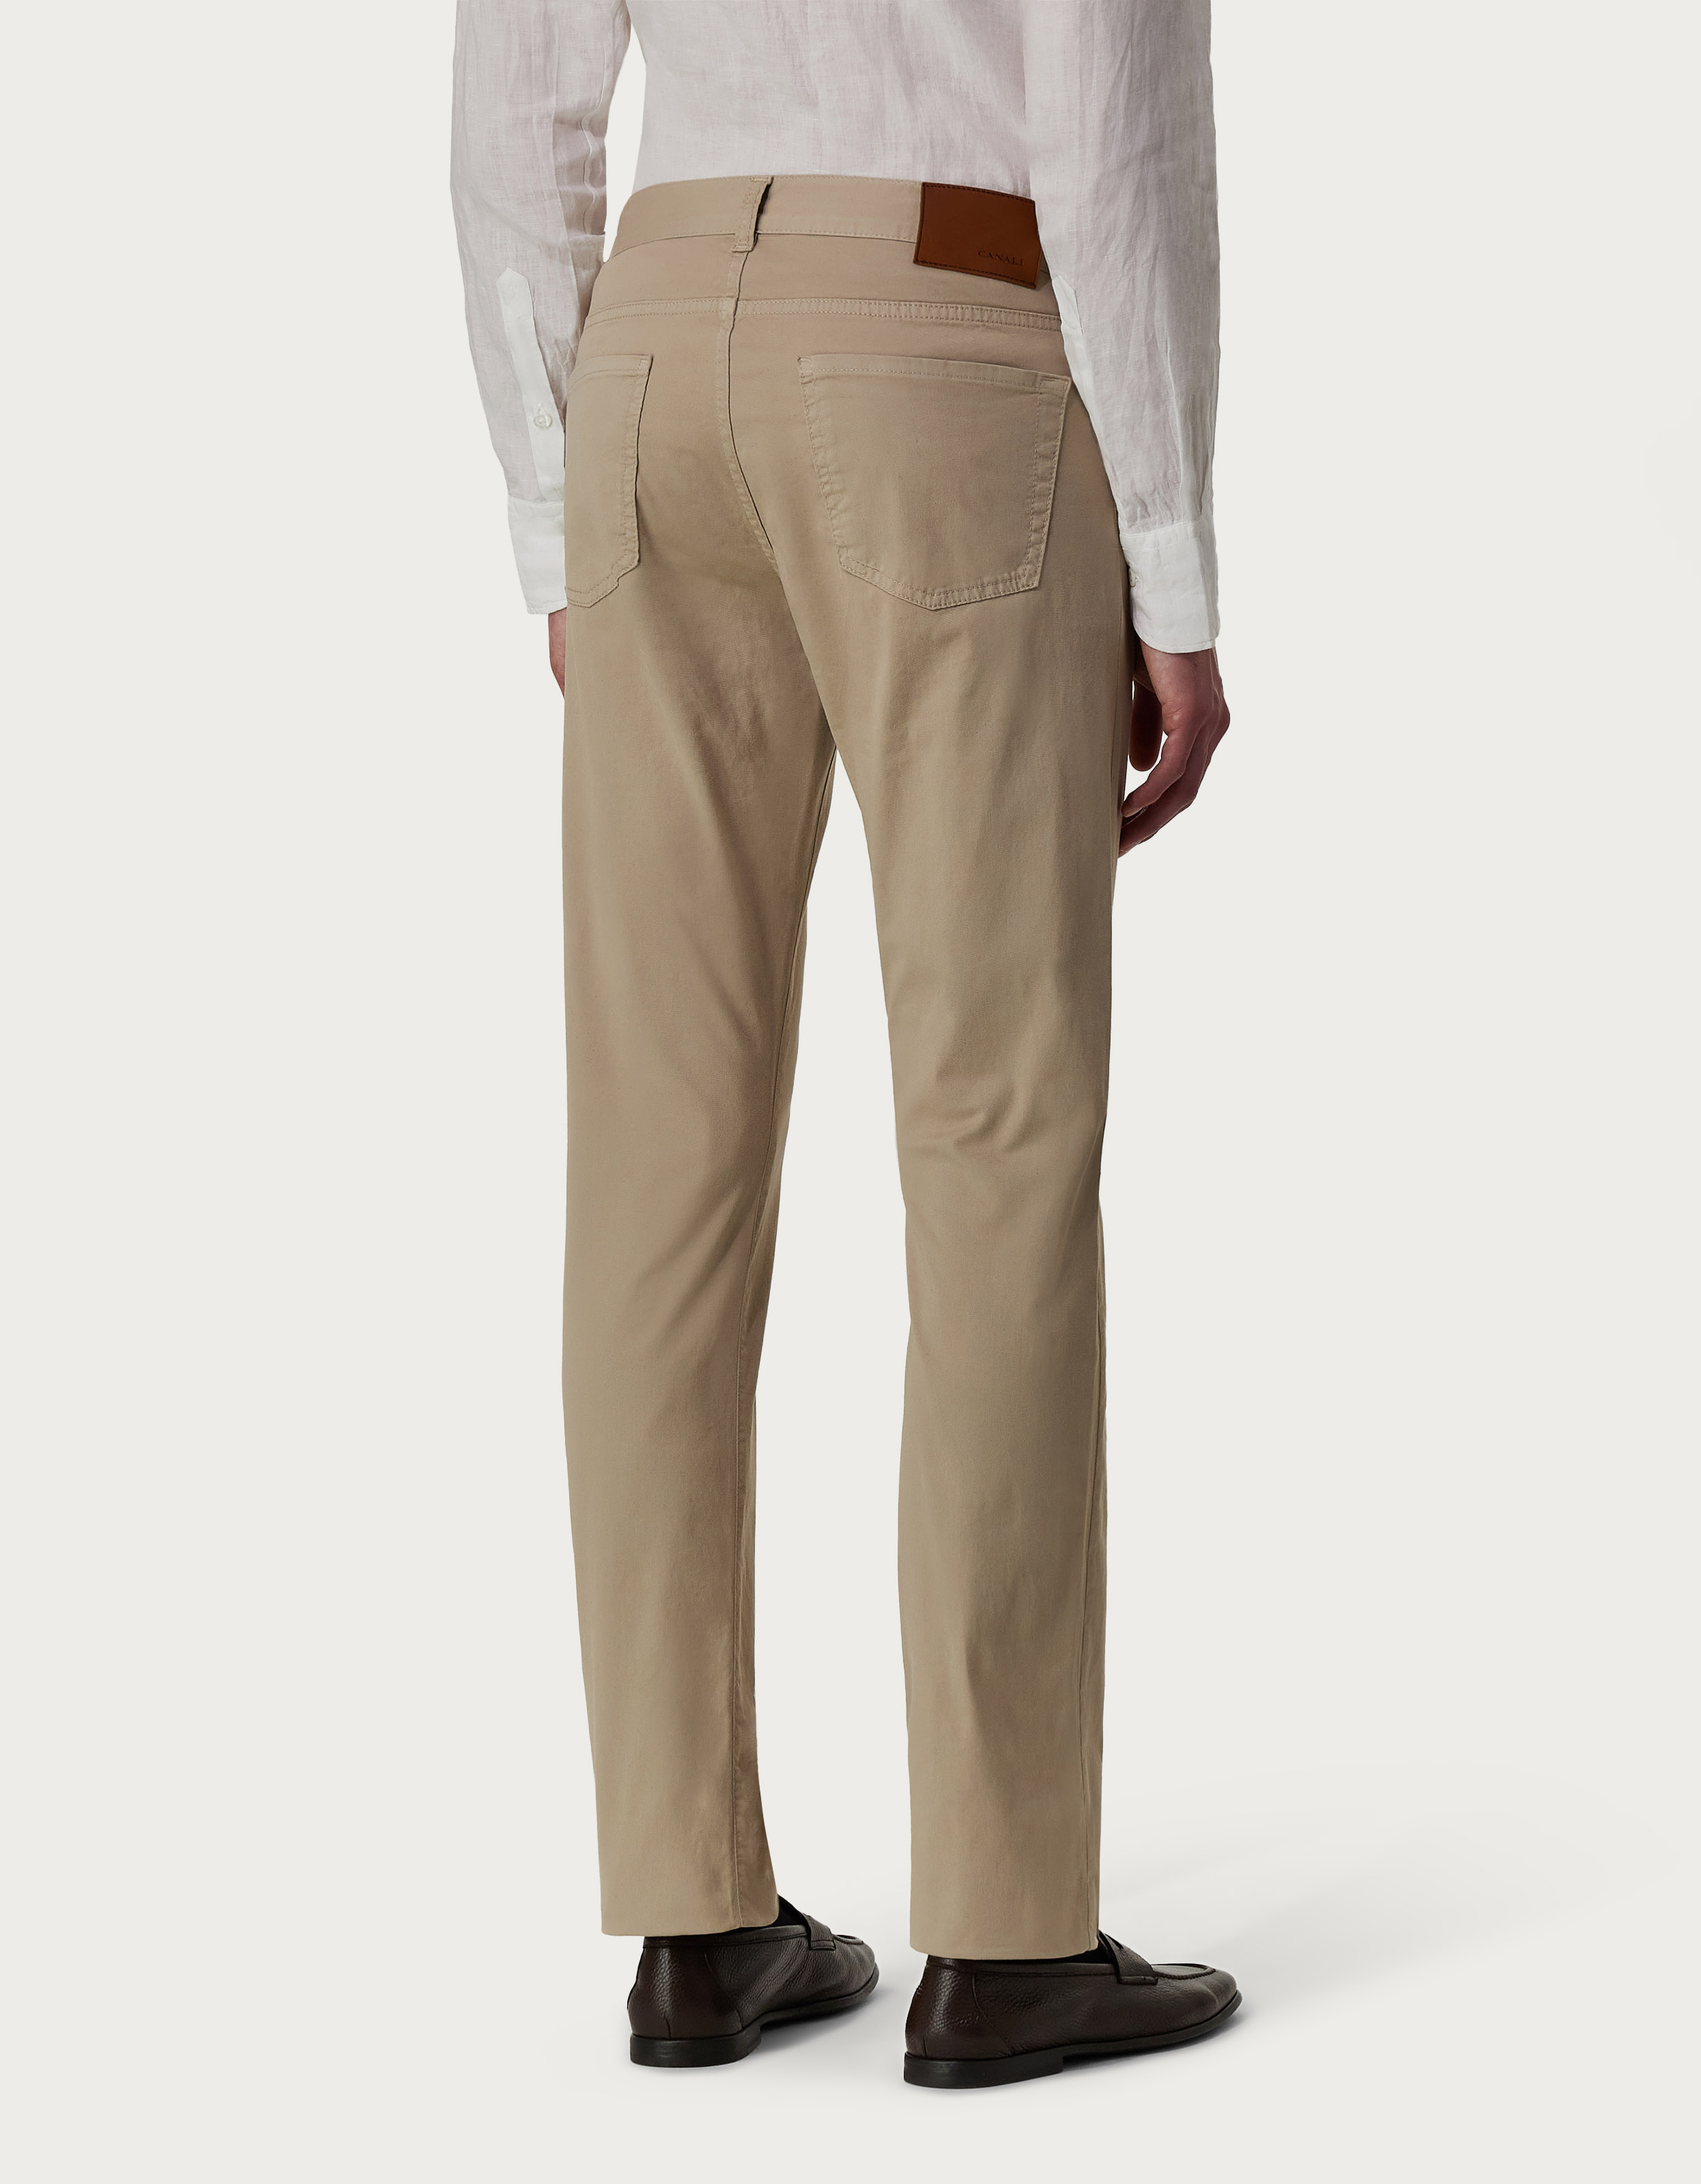 Pants in sand garment-dyed cotton microtwill - Canali US